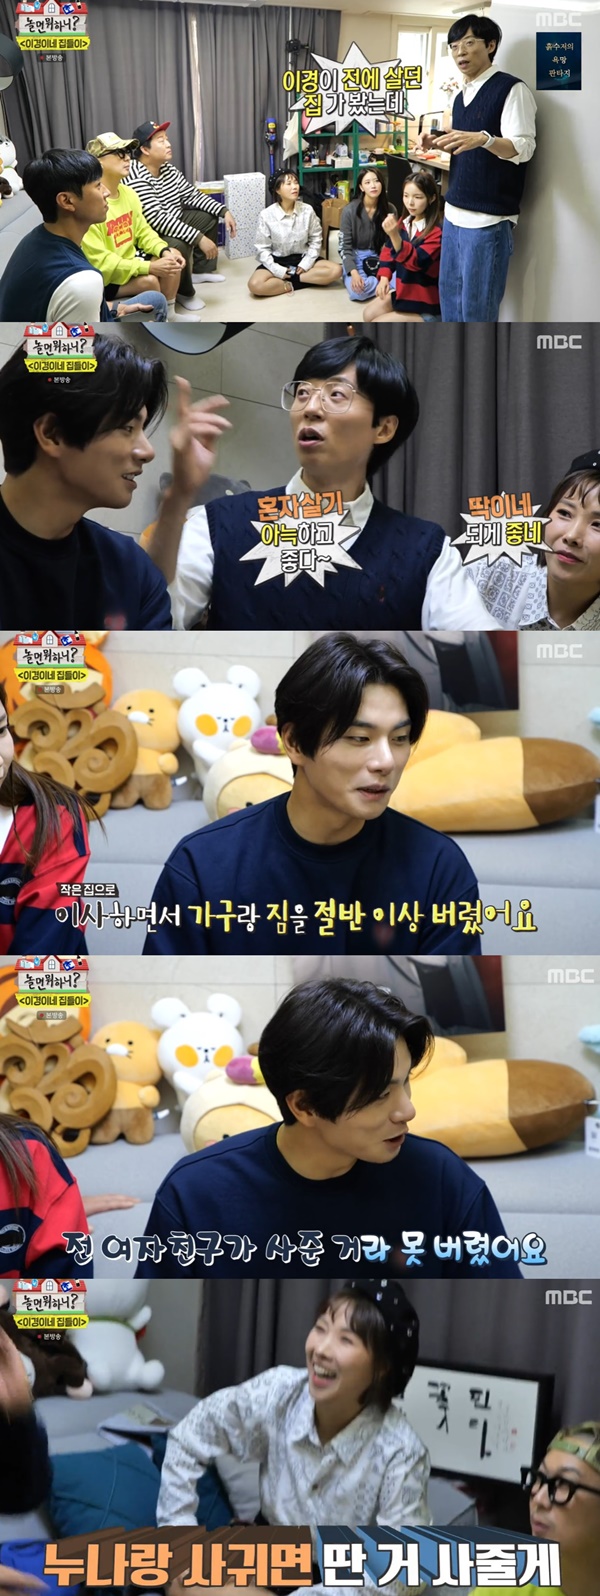 Hangout with Yooo new home for Lee Yi-kyung has been unveiledMBC entertainment program Hangout with Yoo (hereinafter referred to as What to Play), which was broadcast on the 1st, depicted members who visited Lee Yi-kyungs house, which recently moved.On this day, the members visited Lee Yi-kyungs new house without knowing Lee Yi-kyung.But when the homeowner, Lee Yi-kyung, was not seen, he began searching the house. But there was no Lee Yi-kyung.Shin Bong-sun was embarrassed, saying, Houses without Lee Yi-kyung are so funny.The members then waited for Lee Yi-kyung to talk about his new home.The Americas and Park Jin-joo were surprised that they were too neat than they thought.Yoo Jae-Suk said, Lee Yi-kyung-yi said, When I save my house in accordance with the rent of the house I lived in, my house is getting smaller. Lee Yi-kyung, the manager who listened to this, sympathized, I think two-thirds of the (previous) luggage has been abandoned.Lee Yi-kyung, who arrived soon, said, I threw away more than half of the furniture and luggage. I wanted to abandon Sofa, but I could not throw it away because I had bought it from the woman Friend I met before.So Yoo Jae-Suk said, If you have a new woman friend, you can change it then. Shin Bong-sun laughed, saying, If you go out with your sister, you will buy a new one.